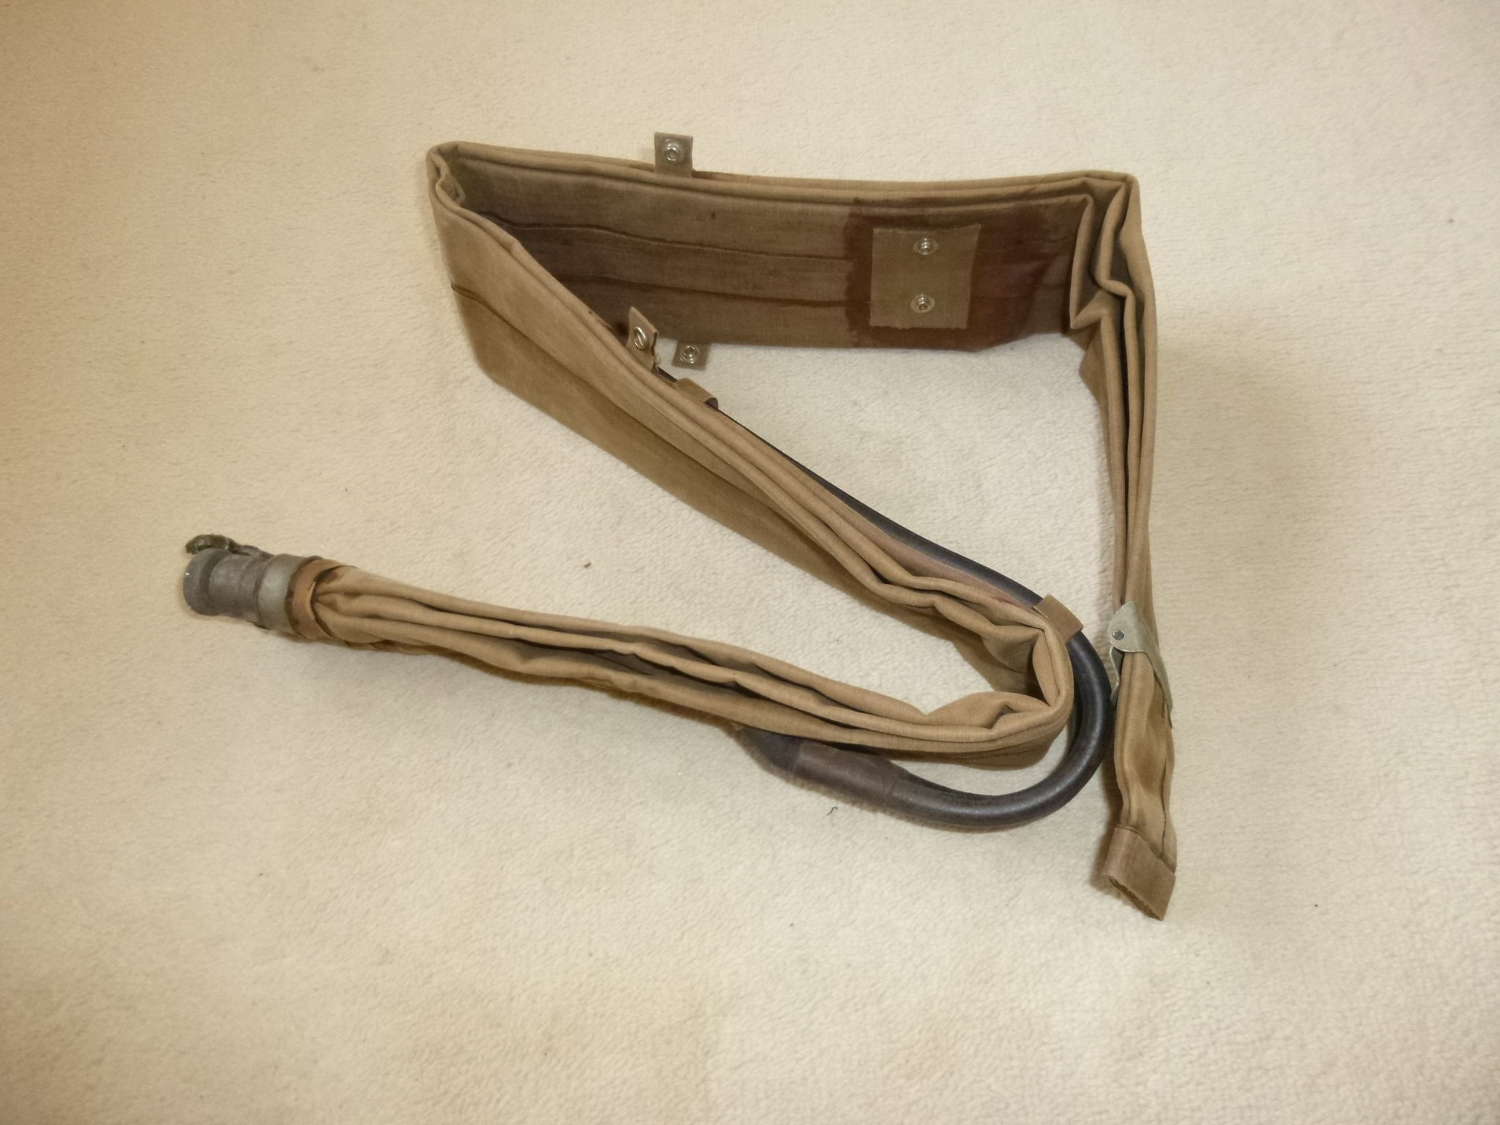 US Navy D-day life belt as issued to invasion troops